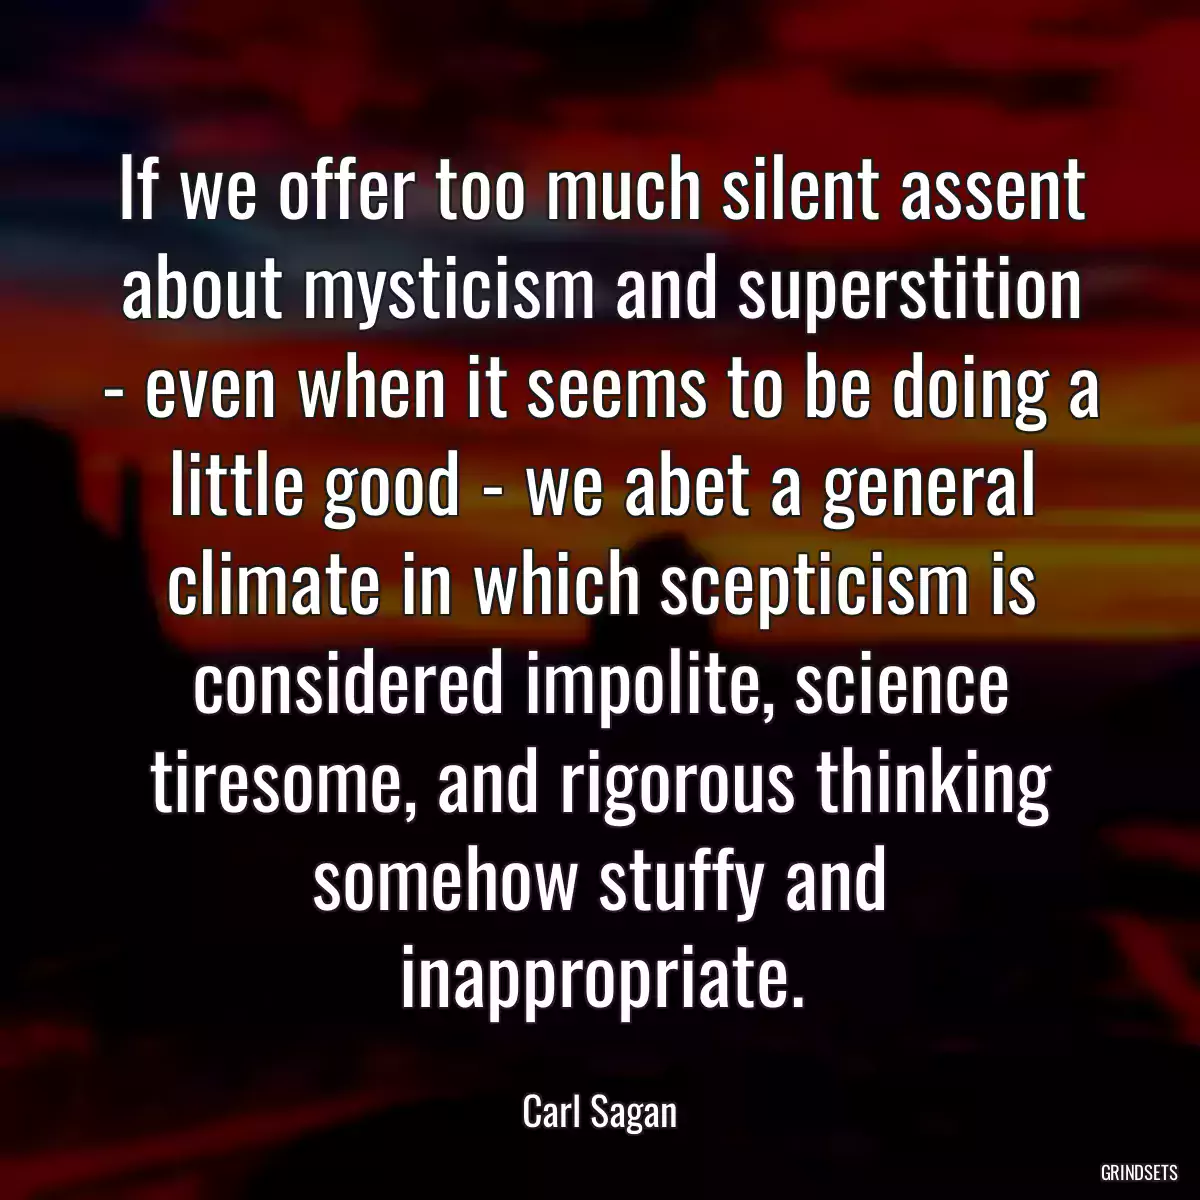 If we offer too much silent assent about mysticism and superstition - even when it seems to be doing a little good - we abet a general climate in which scepticism is considered impolite, science tiresome, and rigorous thinking somehow stuffy and inappropriate.